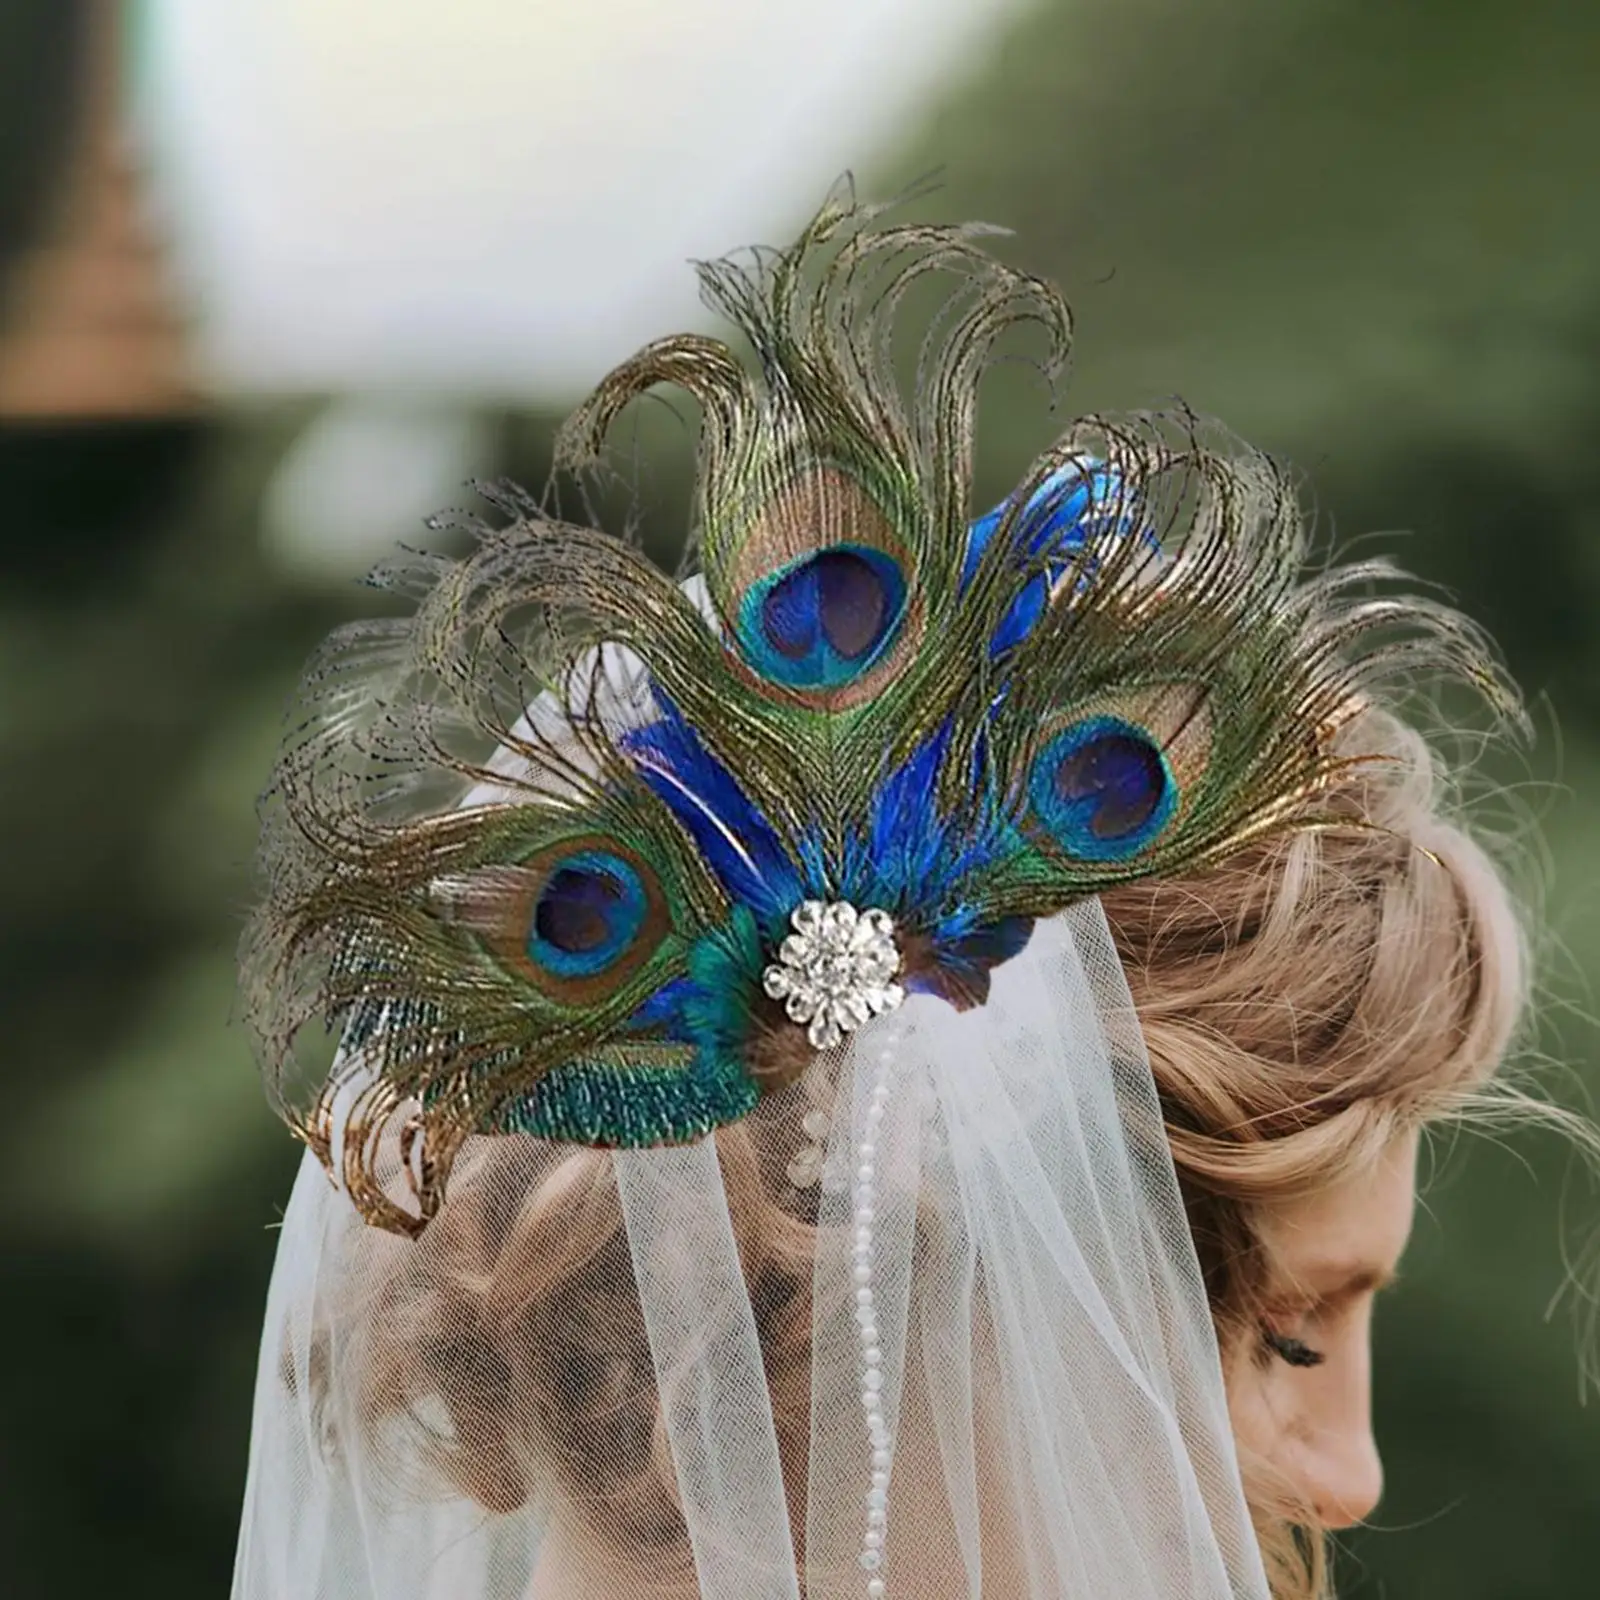 Women Peacock Feather Hair Clip  Elegant 920S Headpiece Hairpin for Party, Wedding, Accessories